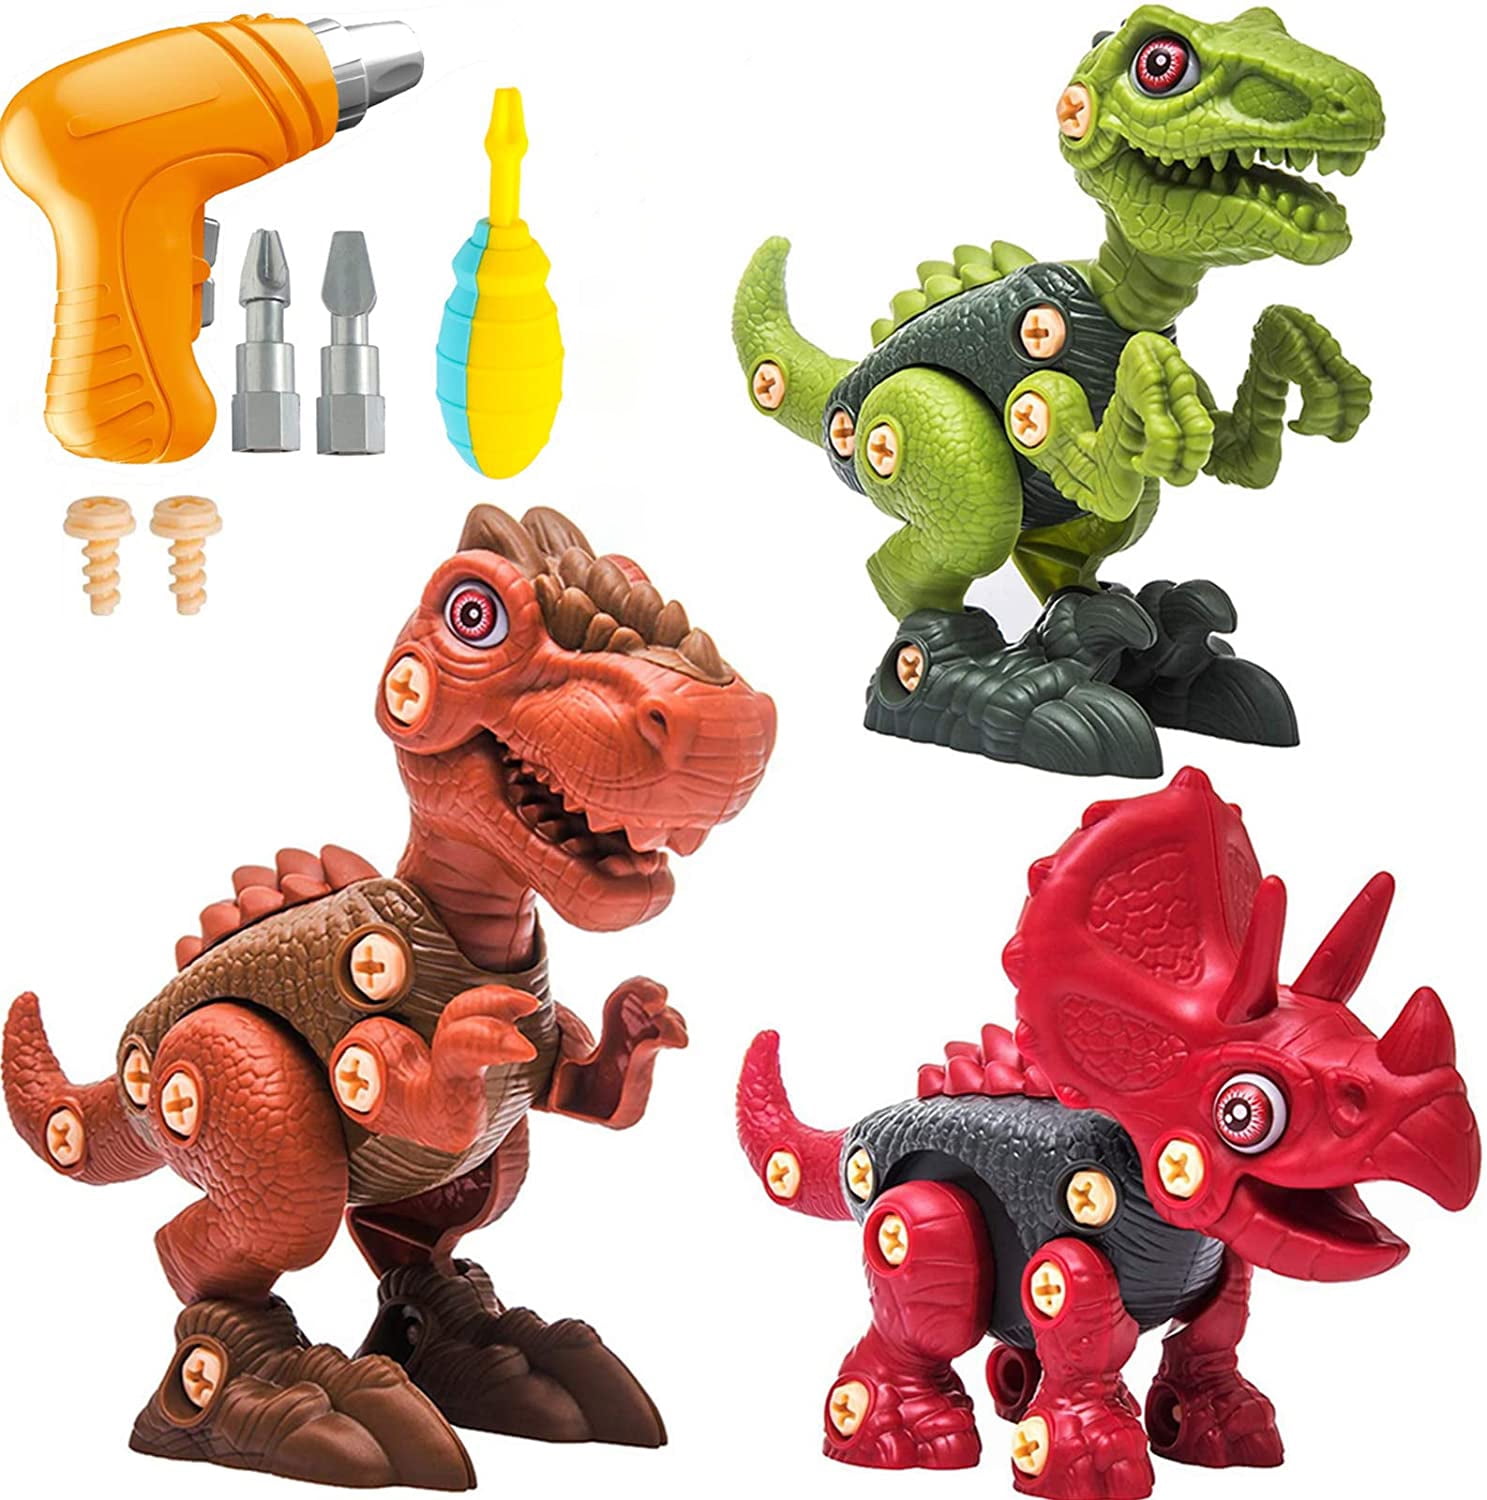 4 Pack Take Apart Dinosaur Toys STEM Puzzles Construction Engineering Kits Building Blocks with Electric Drill Toys for 3 4 5 6 7 8 Year Old Boys Girls Toddler Gifts Dinosaur Toys for Kids 3-5